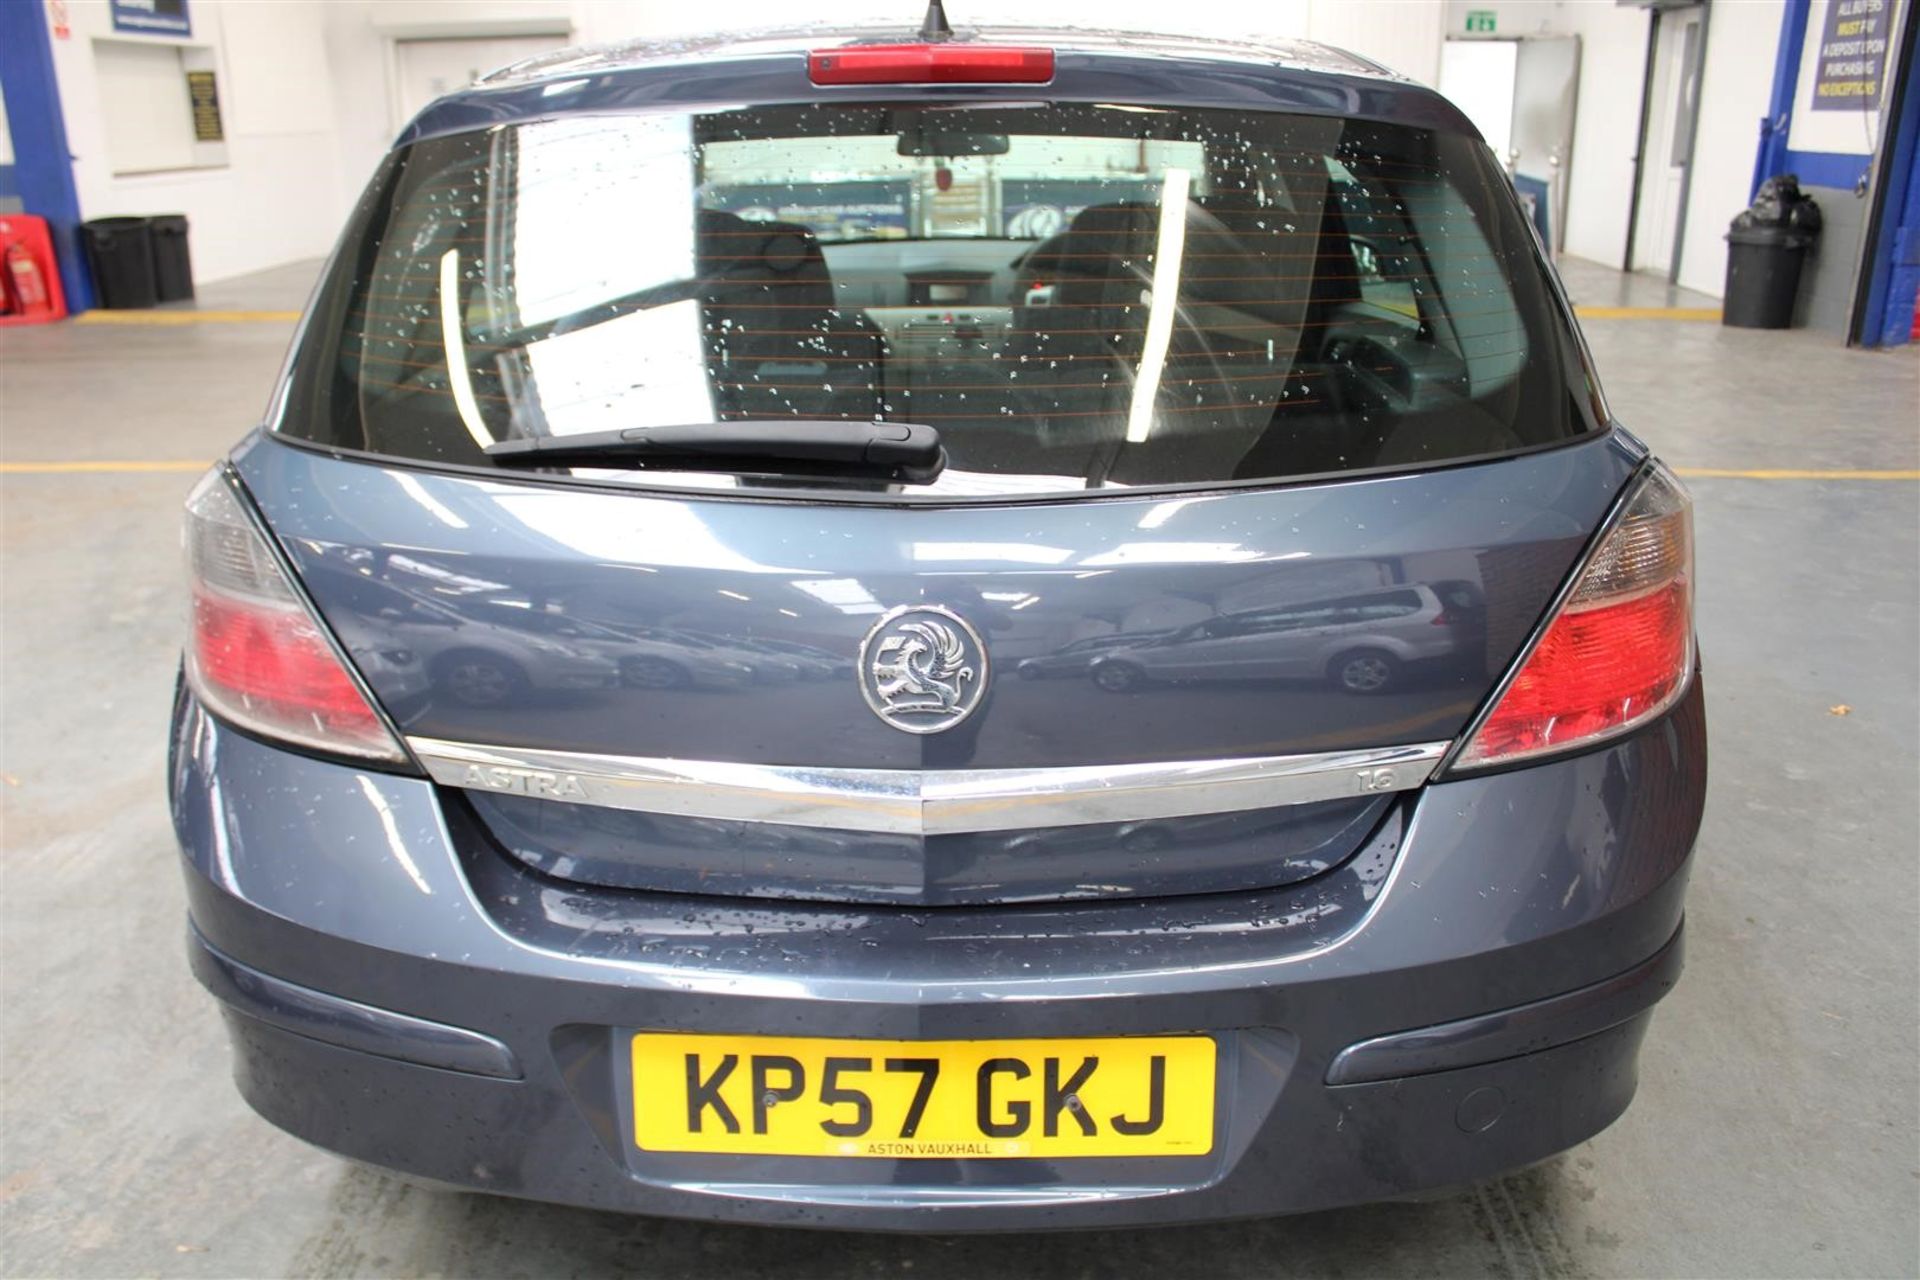 57 07 Vauxhall Astra Life - Image 14 of 32